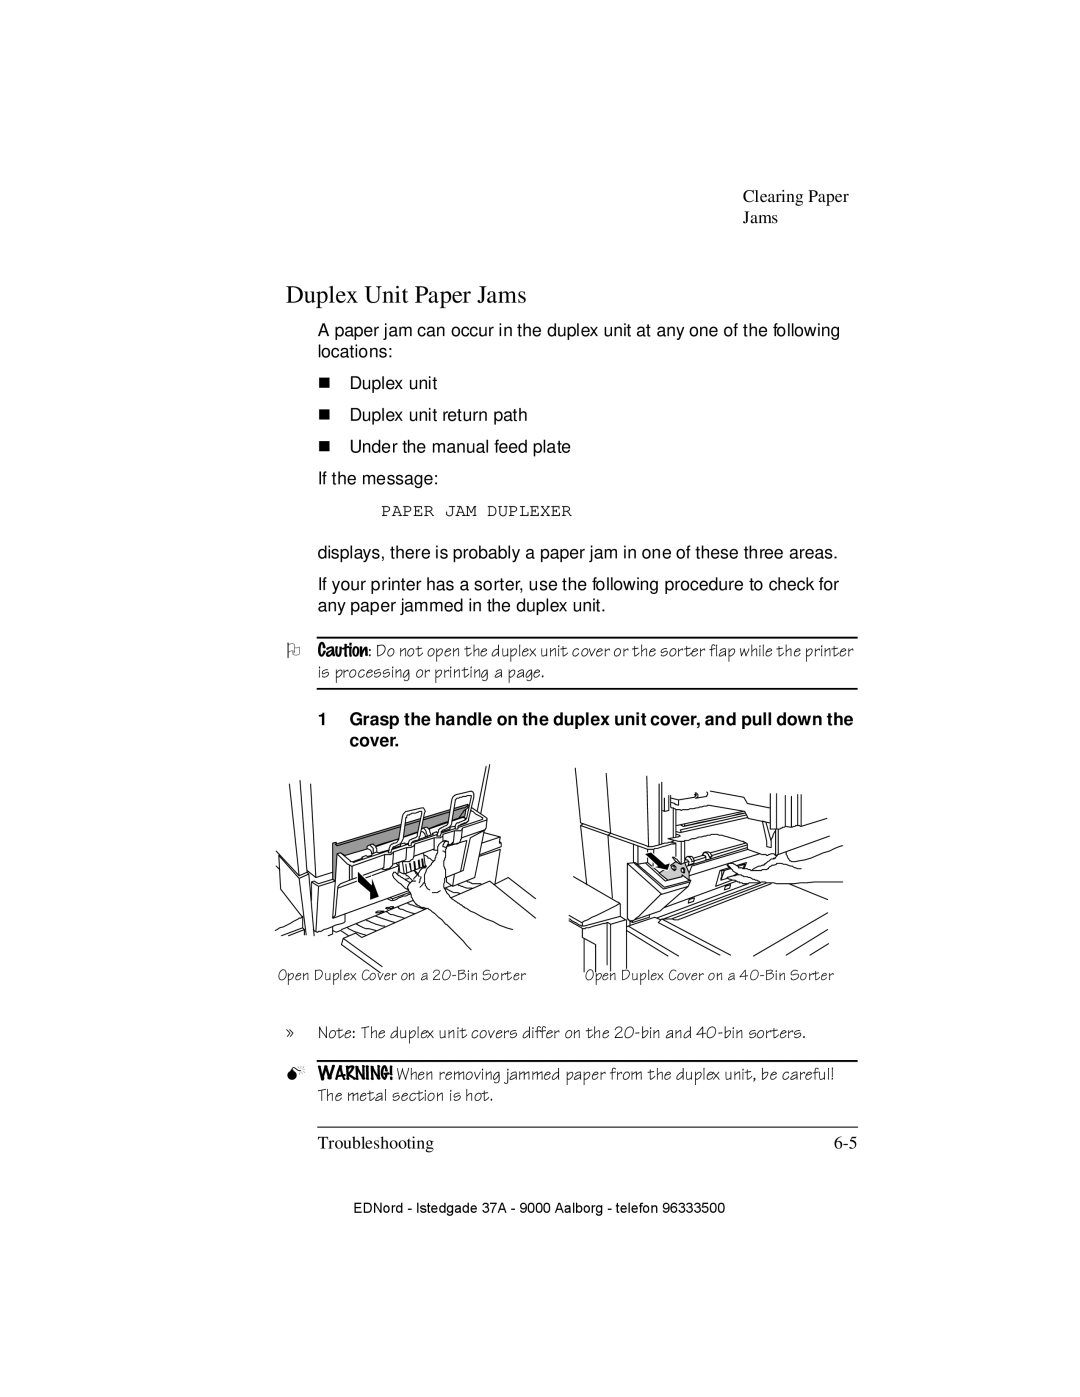 IBM QMS 4525 manual Duplex Unit Paper Jams, Grasp the handle on the duplex unit cover, and pull down the cover 